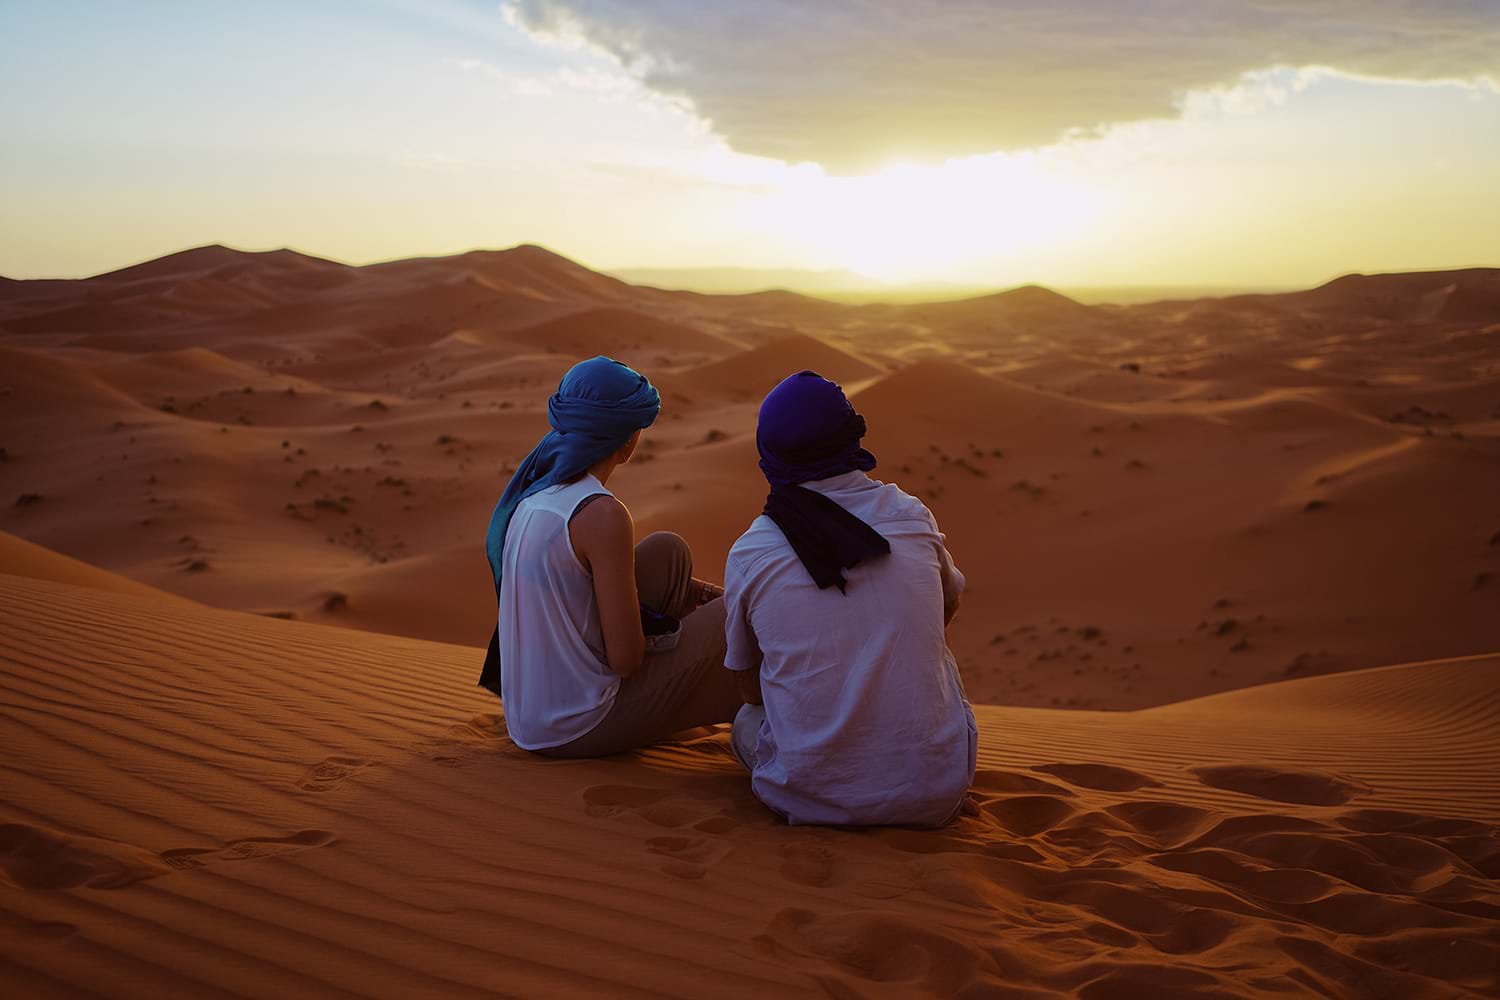 Two people sitting on sand dune in desert